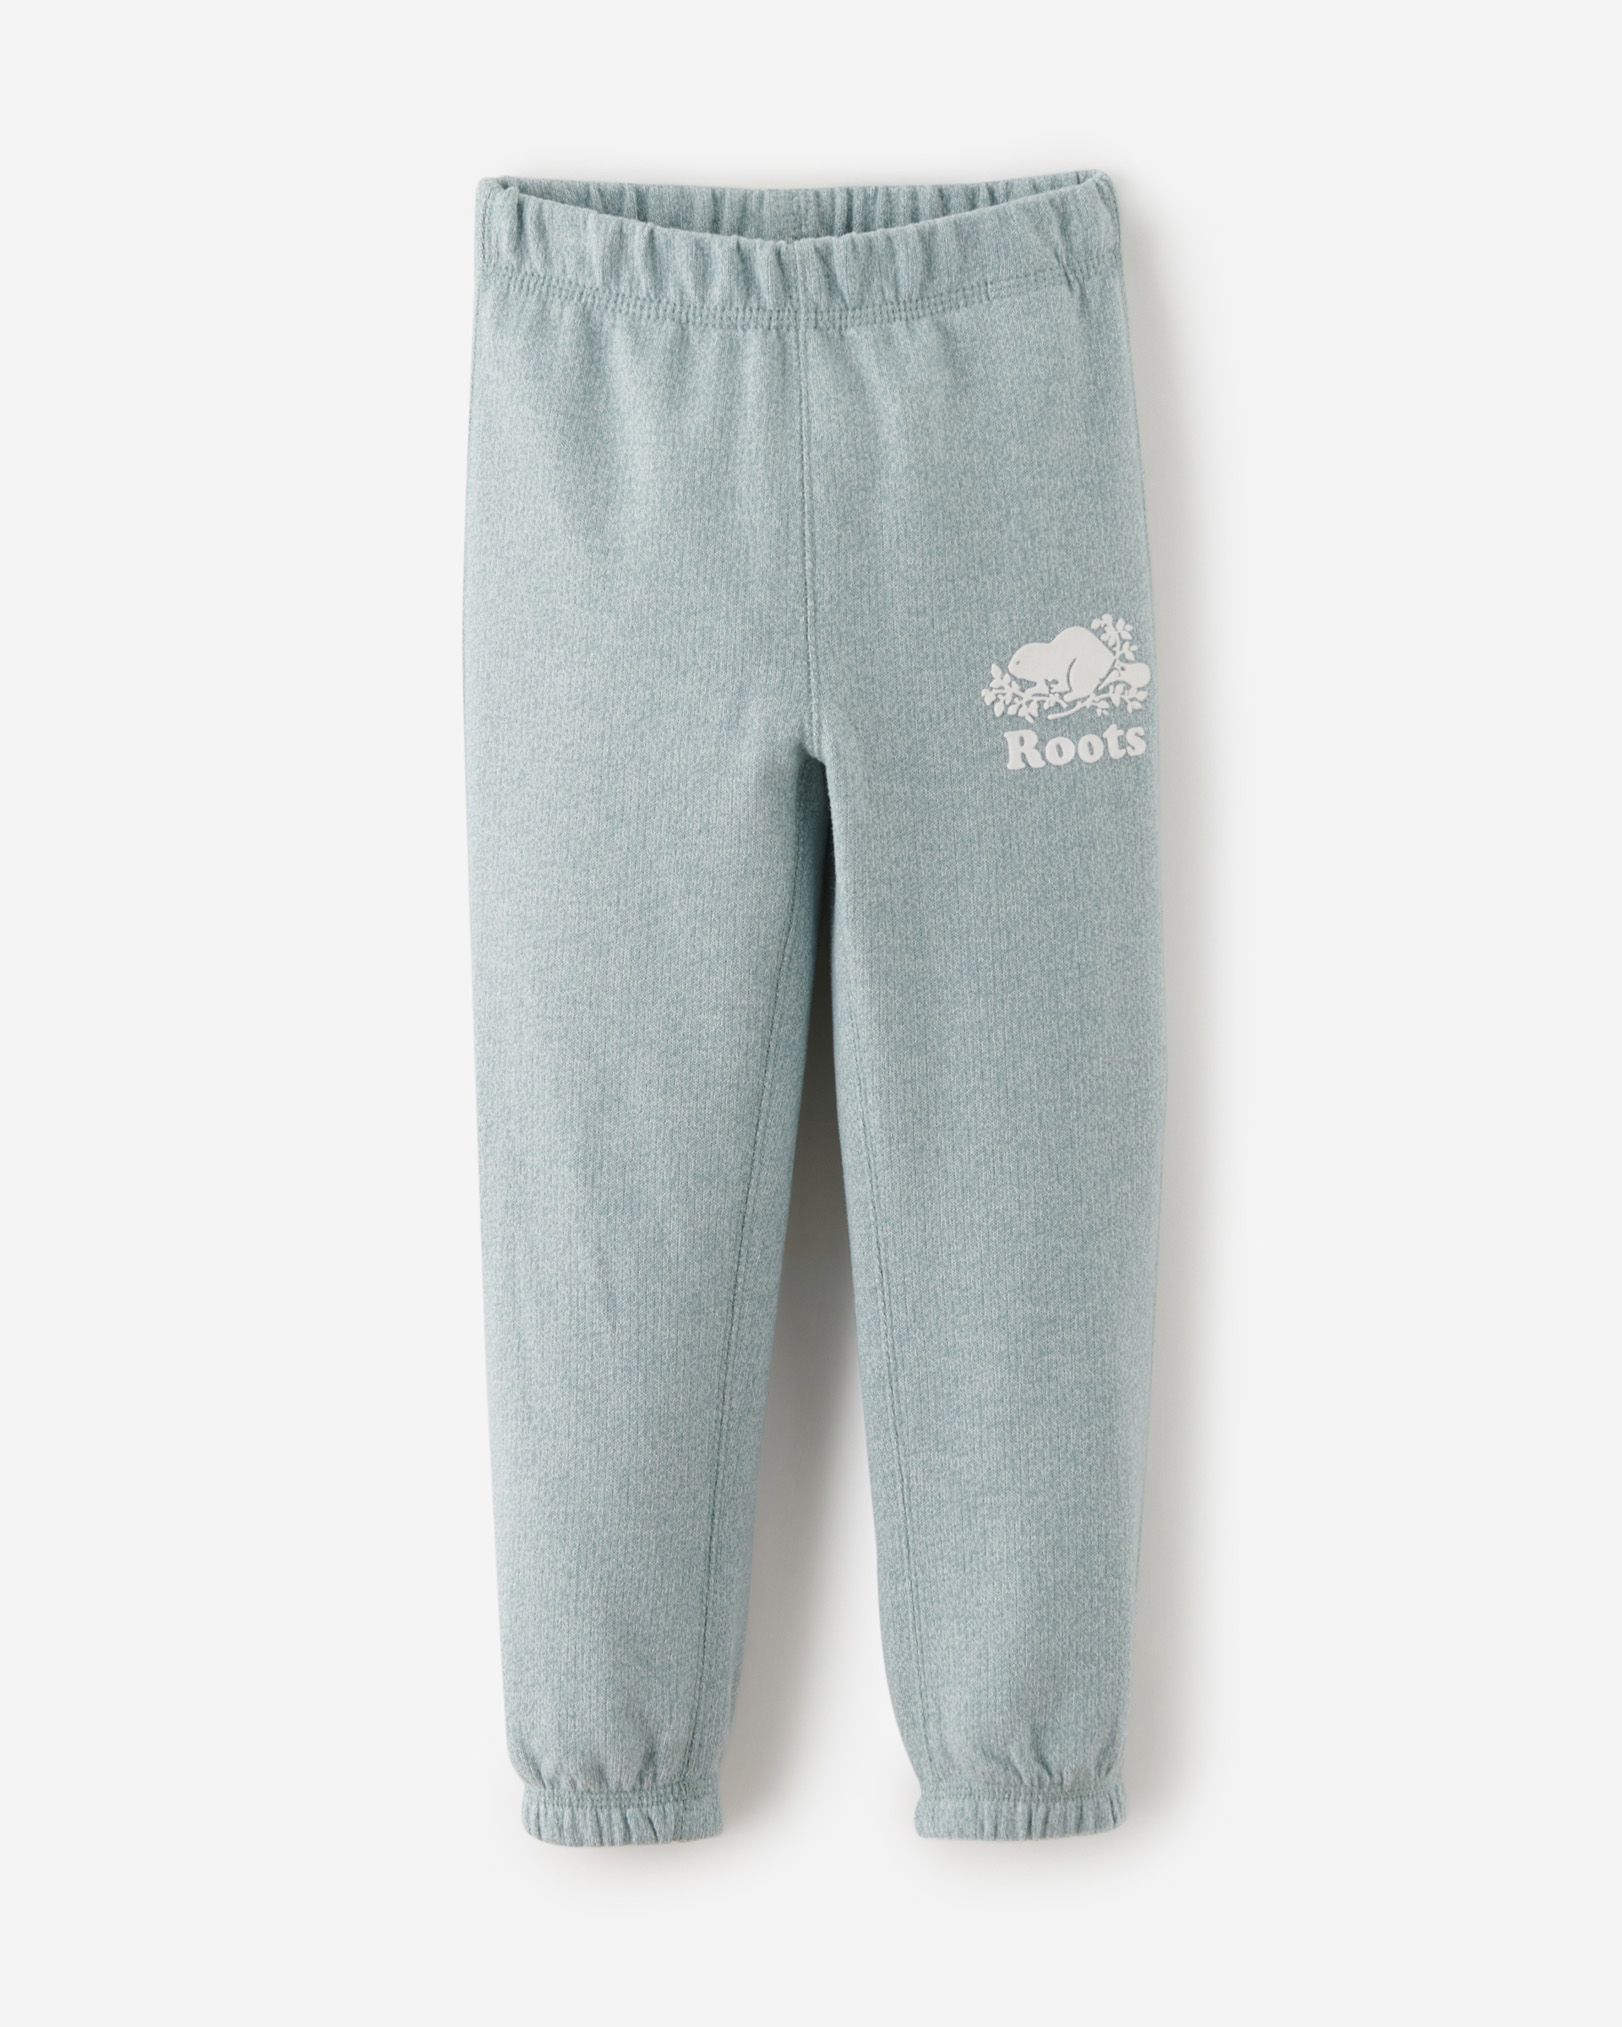 Roots Toddler Original Sweatpant in Silver Blue Pepper